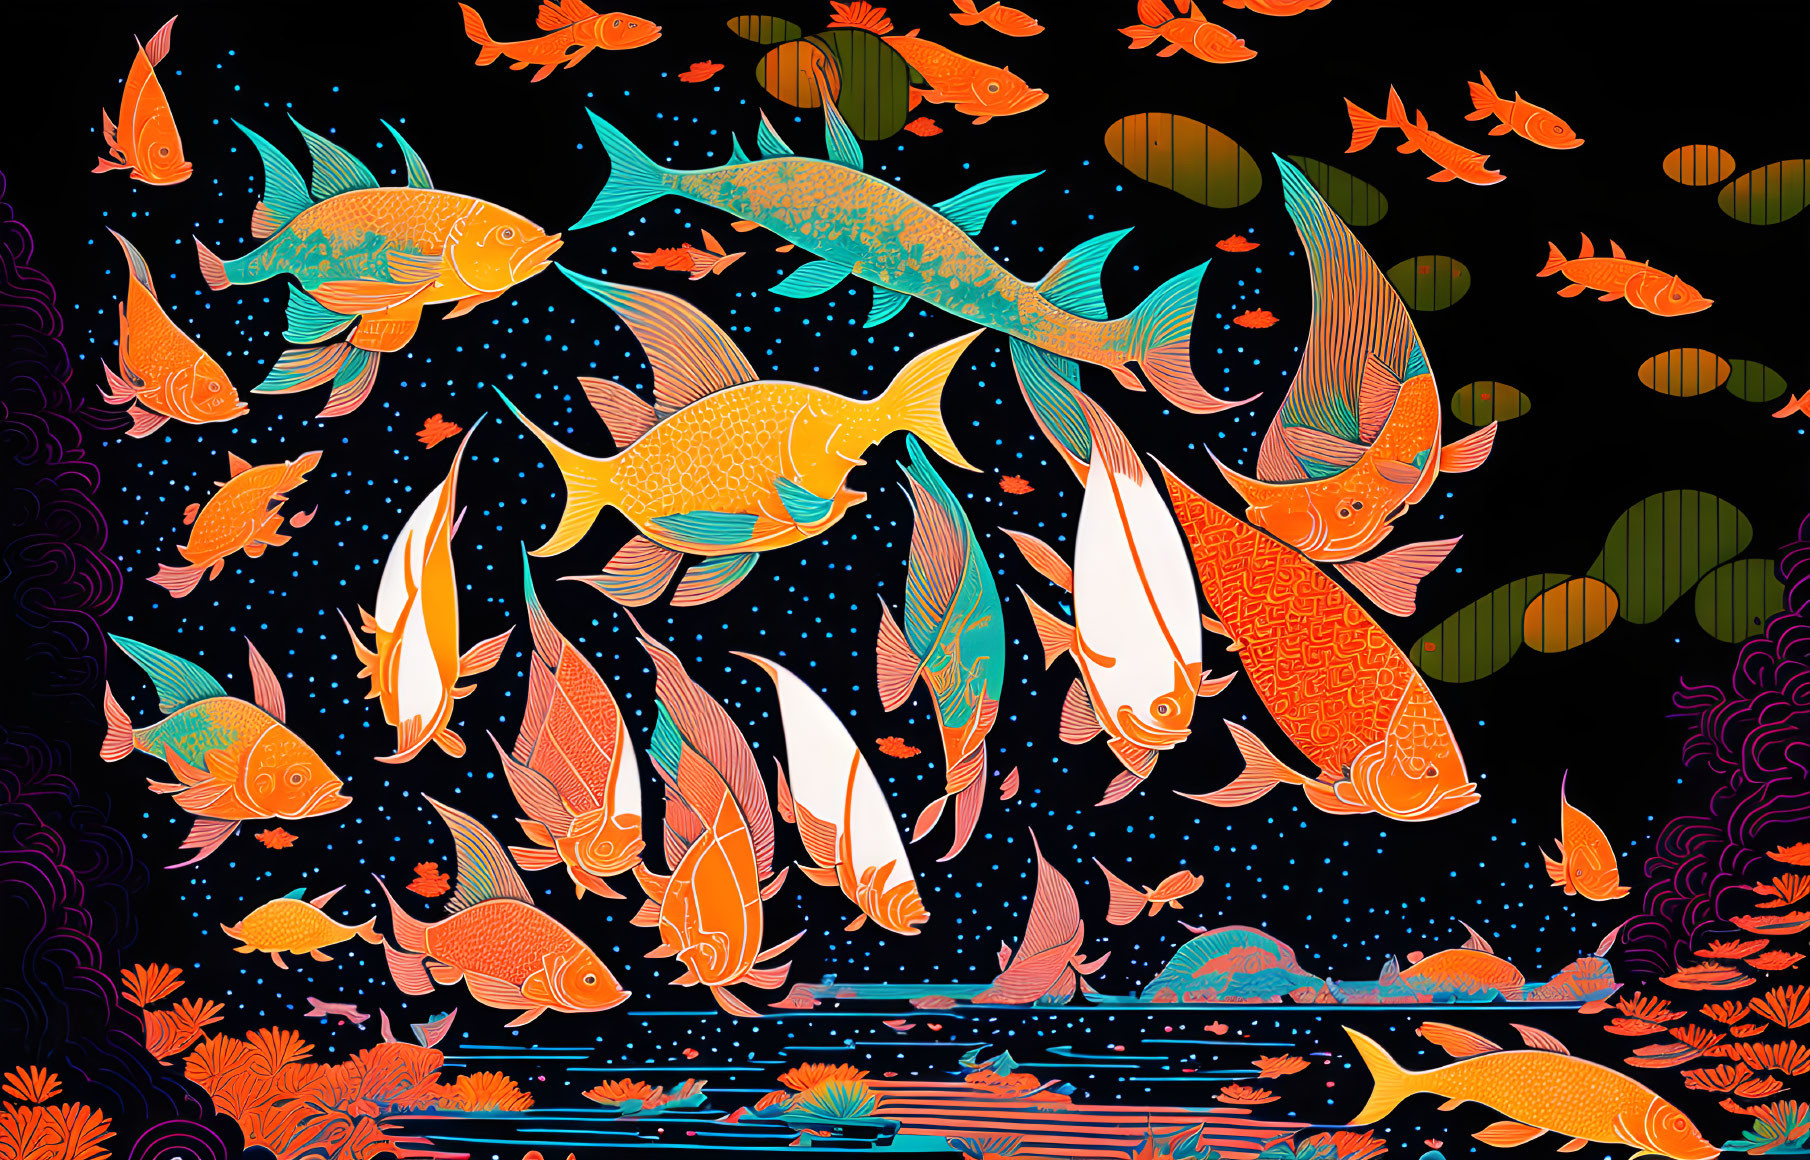 Colorful Fish Illustration in Patterned Underwater Scene